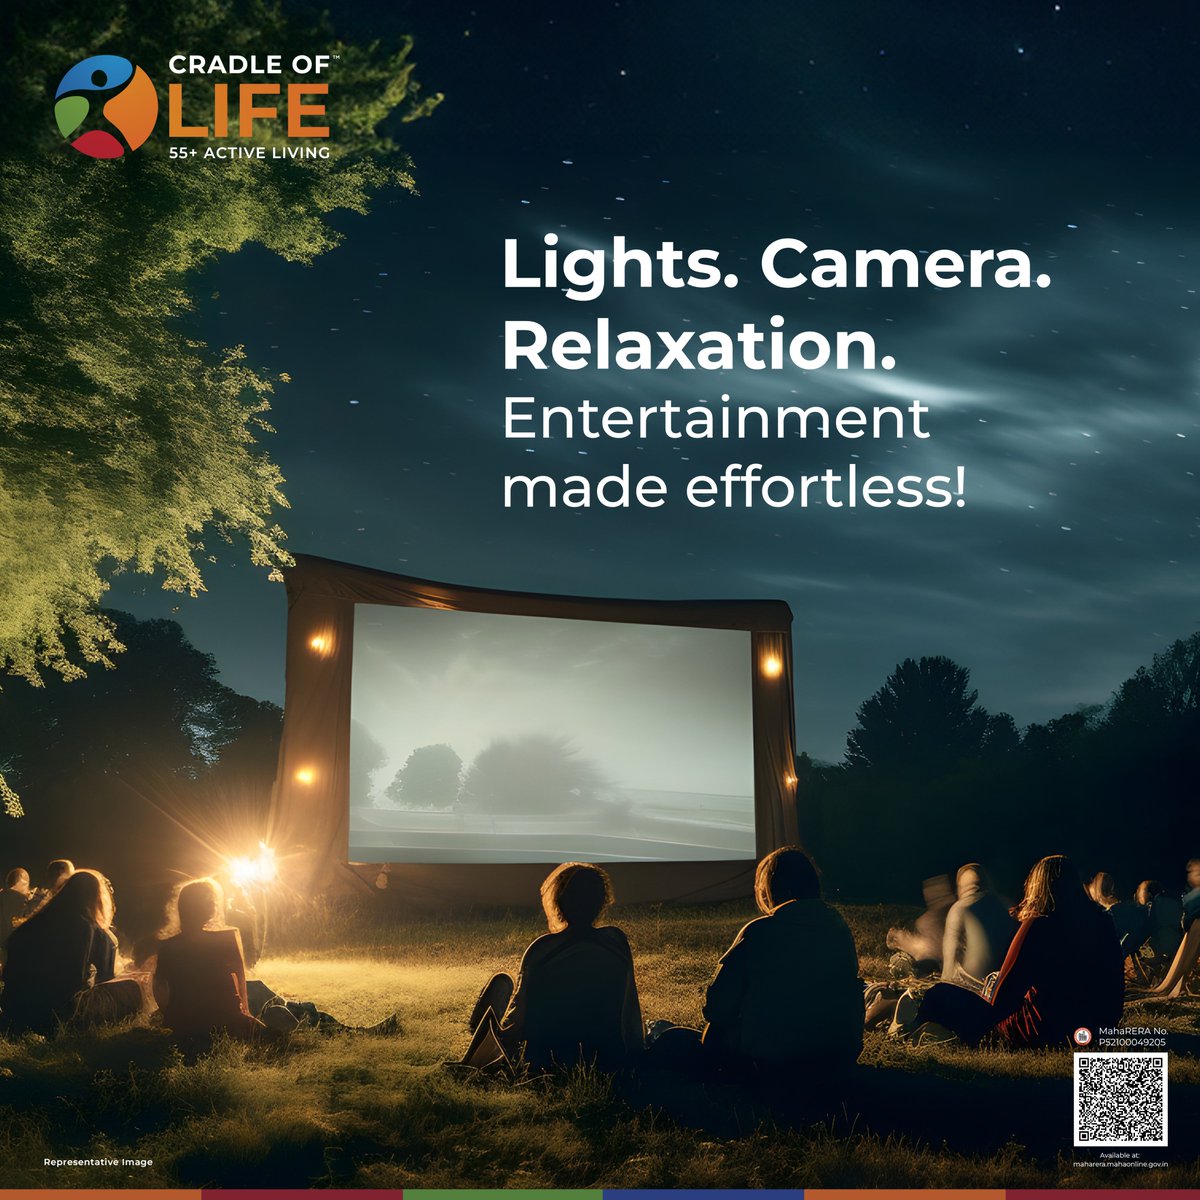 Transforming movie nights into memorable experiences with the perfect blend of fun and comfort. 

MahaRERA No: P52100049205

#JoyfulLiving #ActiveLiving #DynamicLiving #CradleOfLife #SeniorLiving #TimeForYourself